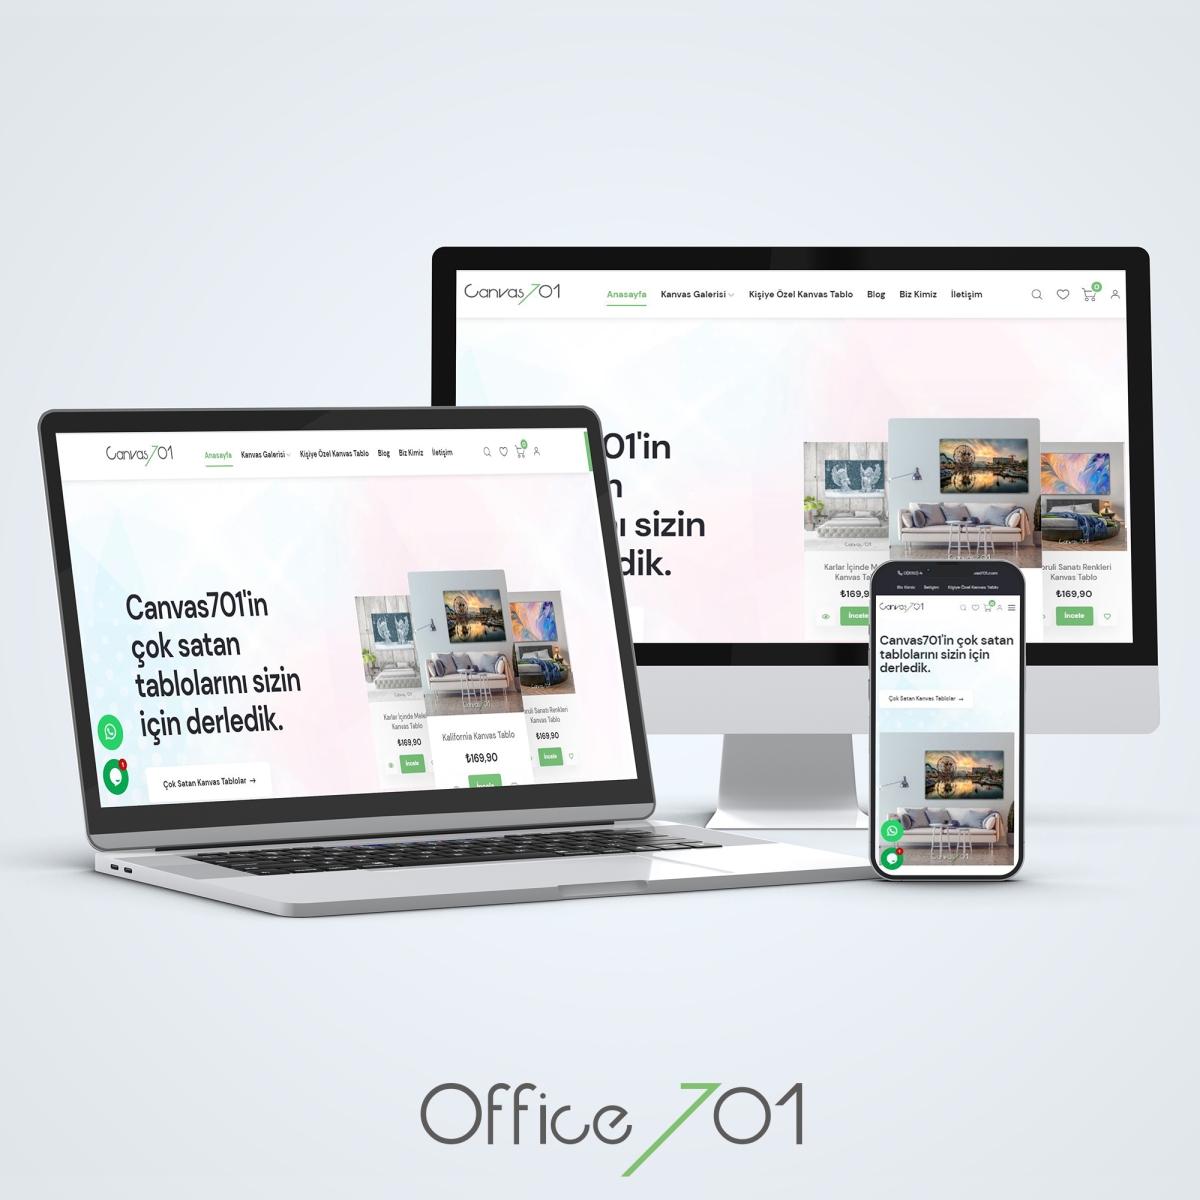 Office701 | Canvas701 | E-Commerce Website (Redesigned)